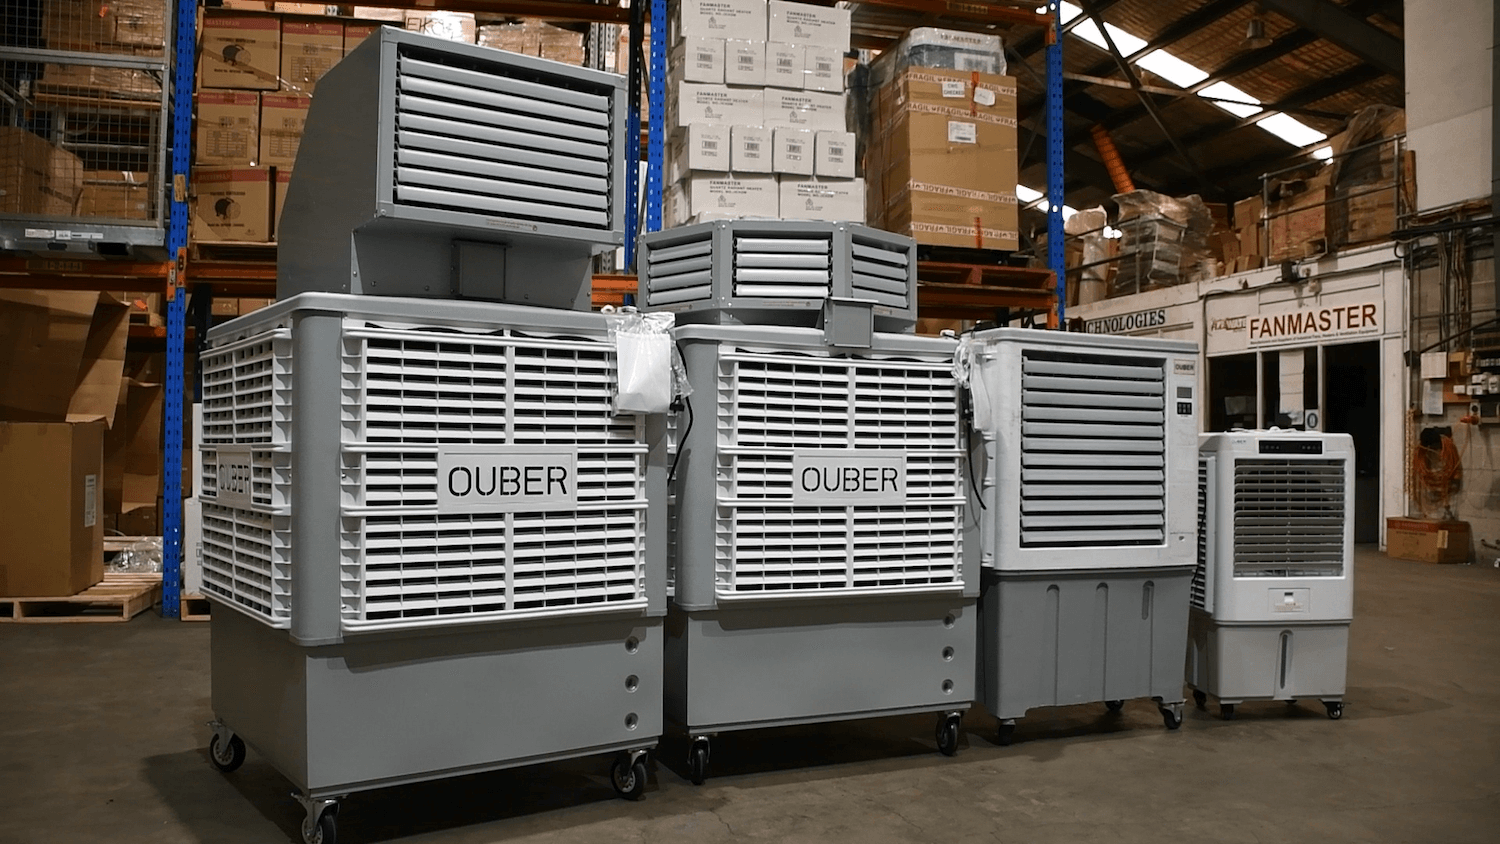 Do Evaporative Coolers Work On Hot, Humid Days? / Fanmaster